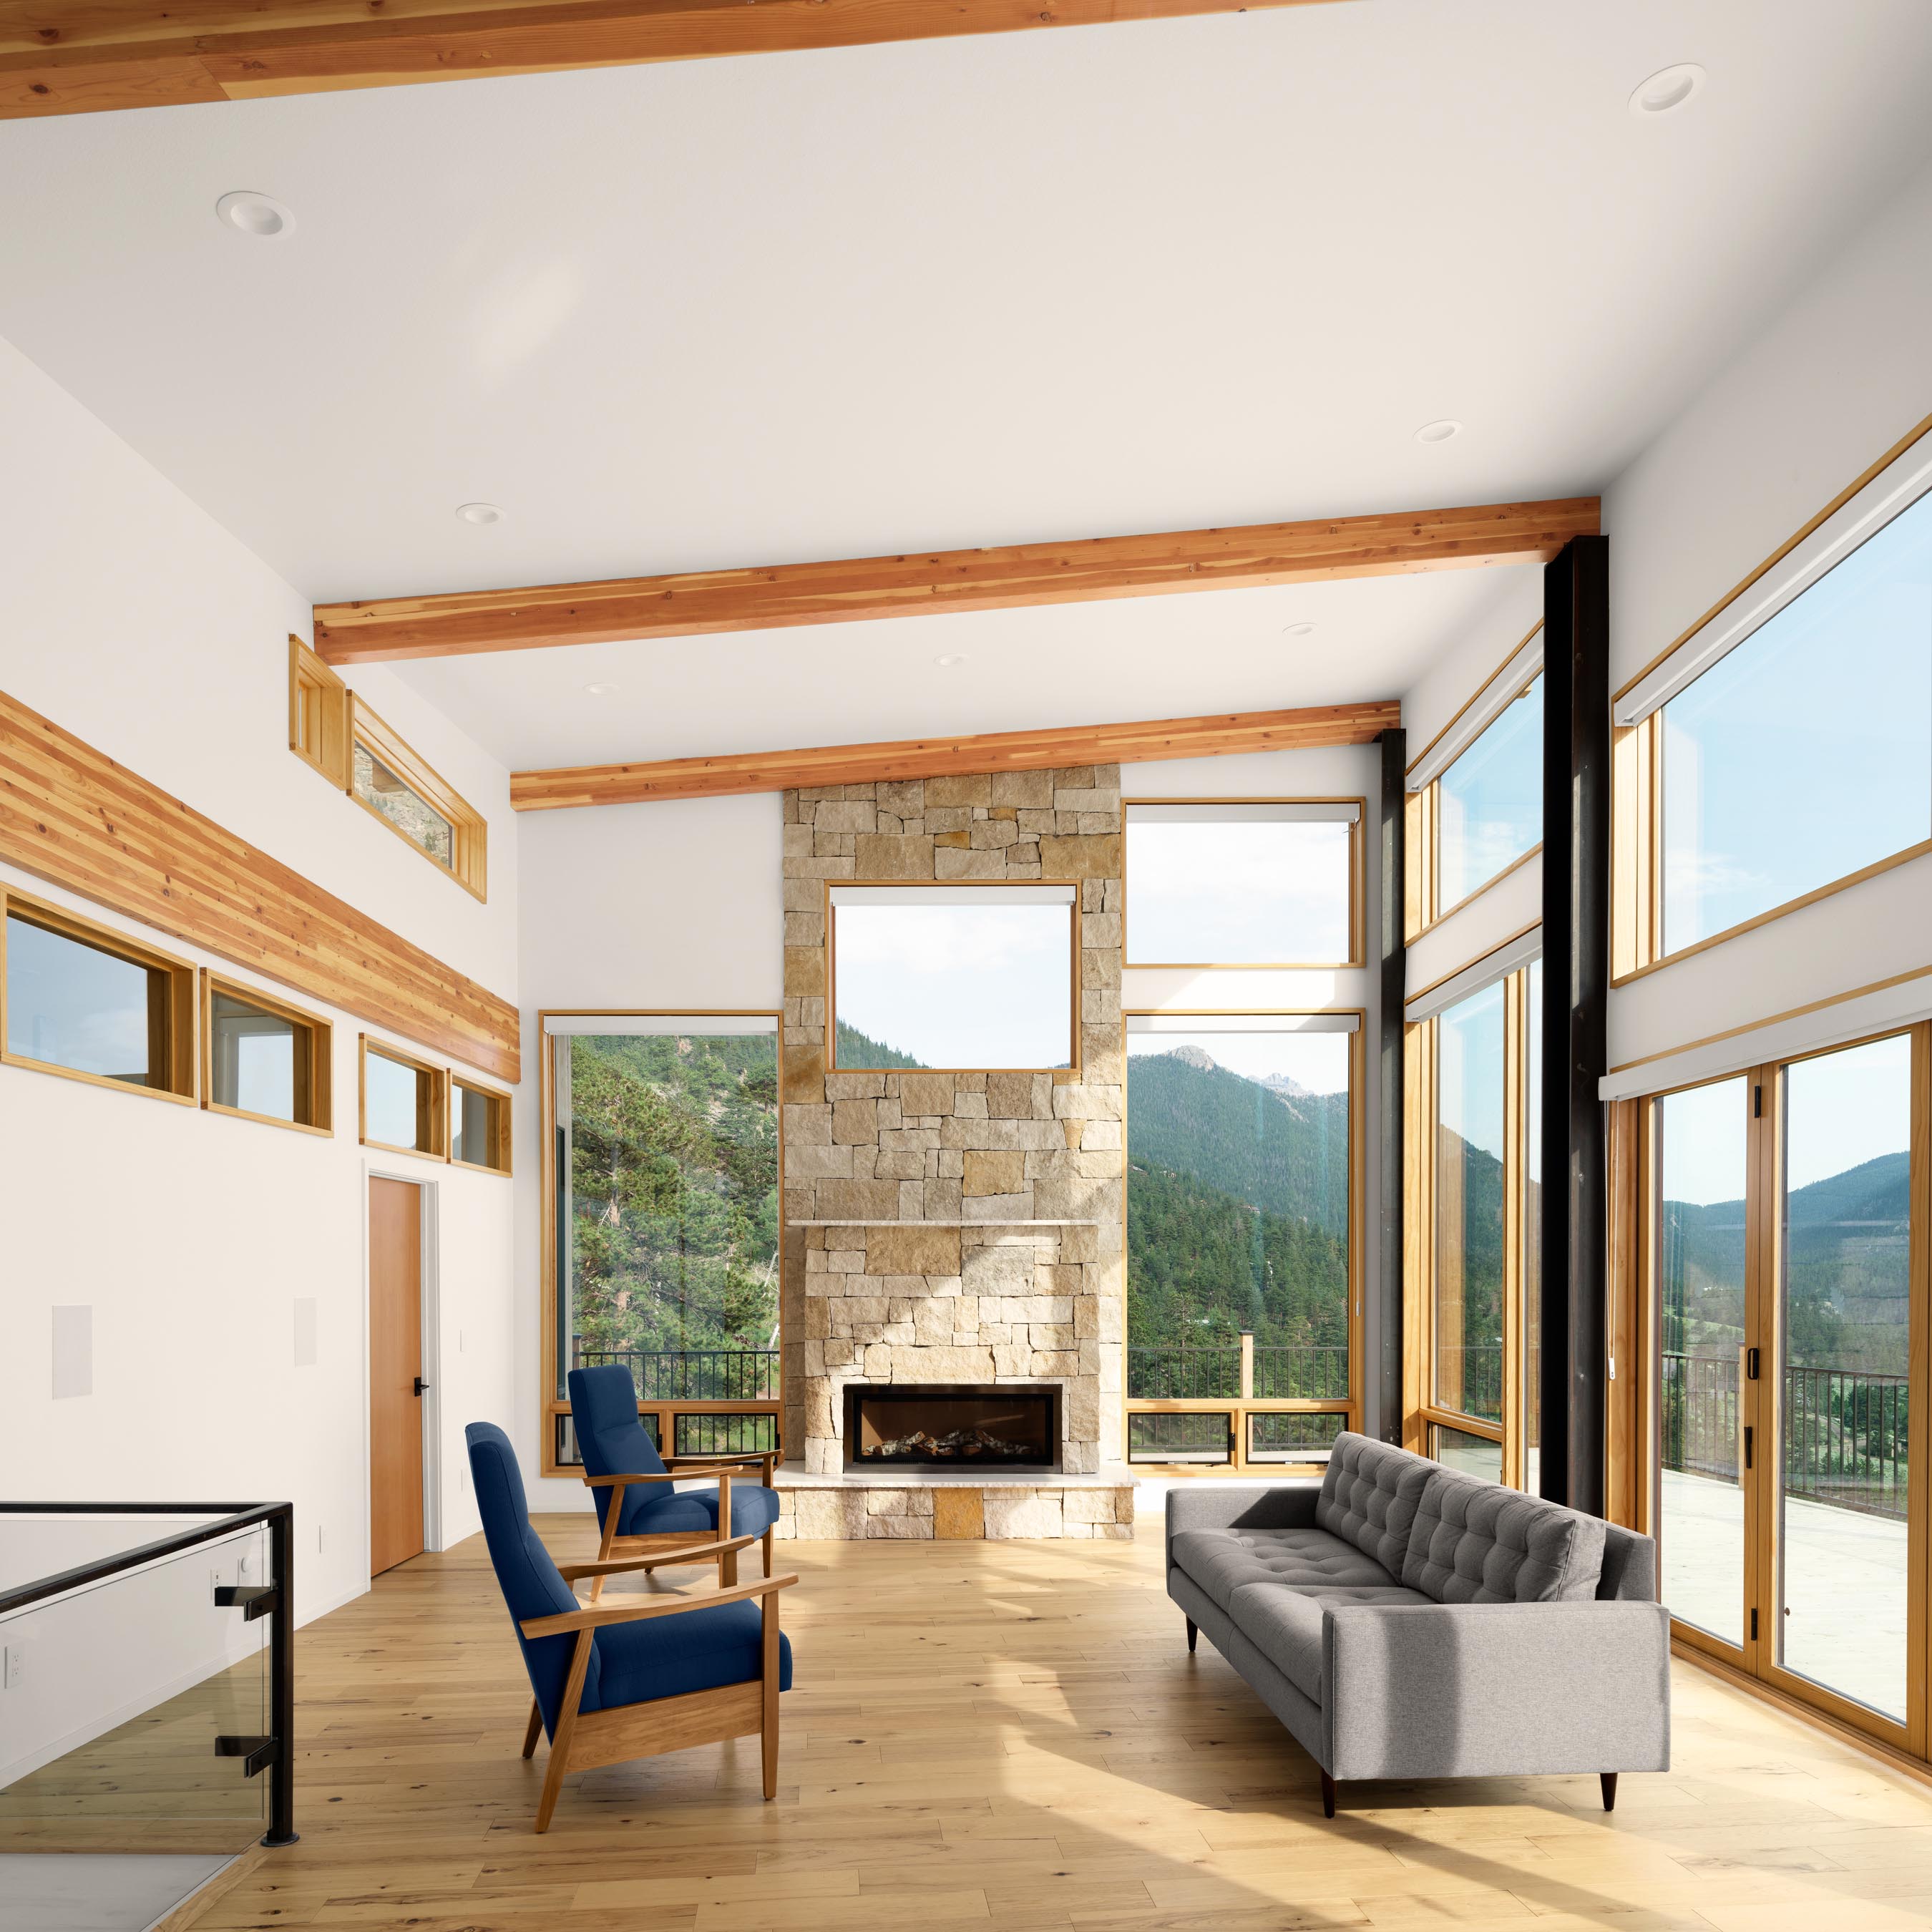 Residential architecture photography by Warren Diggles. 1 point perspective of minimal living room with mountain views. New home project by Bas1s Architecture.